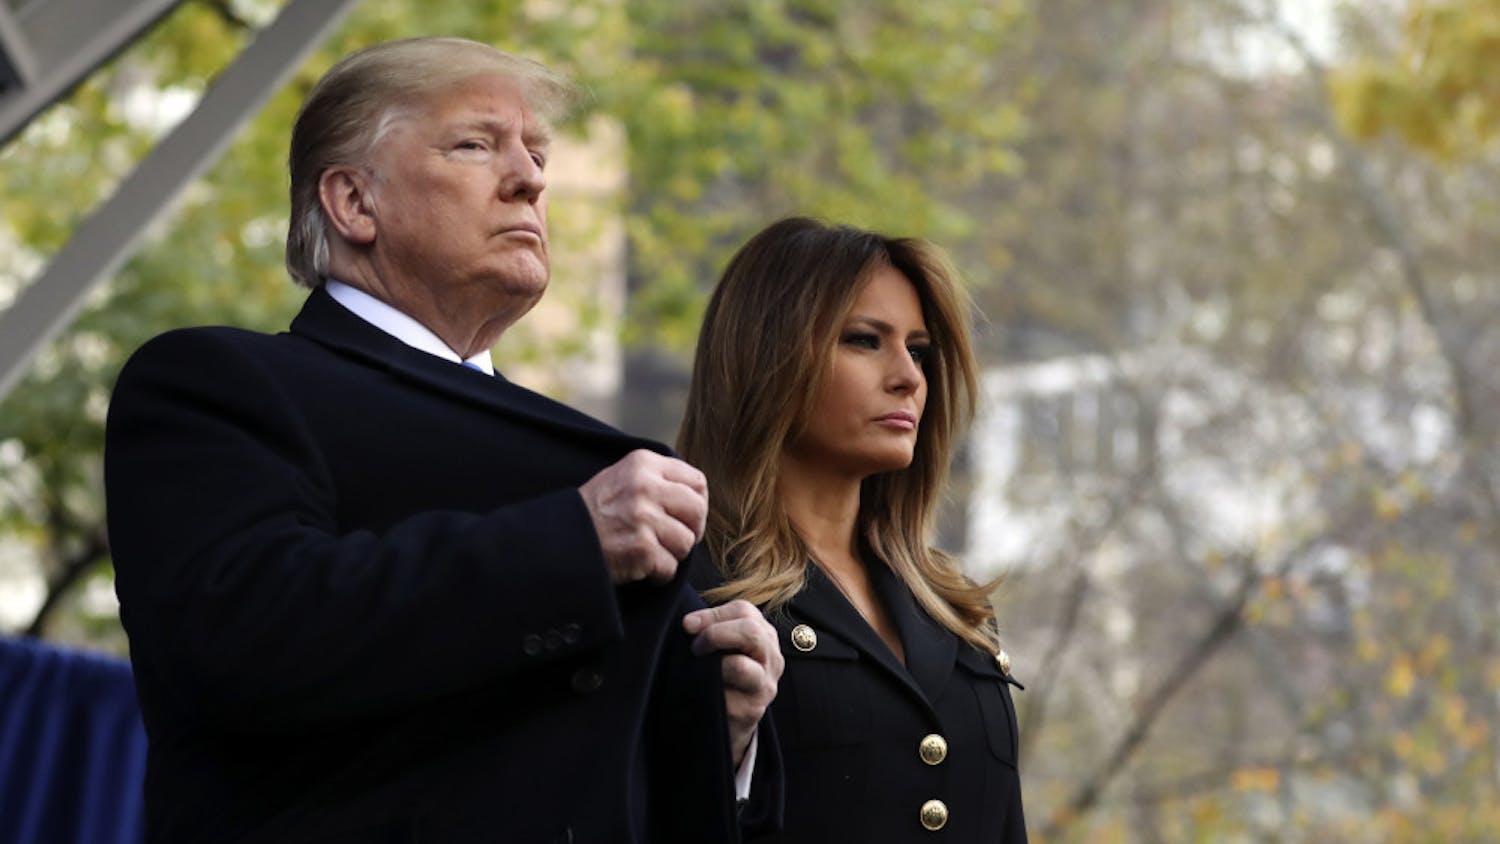 President Donald Trump and first lady Melania Trump attend ceremony at the New York City Veterans Day Parade at Madison Square Park in New York, Monday, Nov. 11, 2019. (AP Photo/Andrew Harnik)